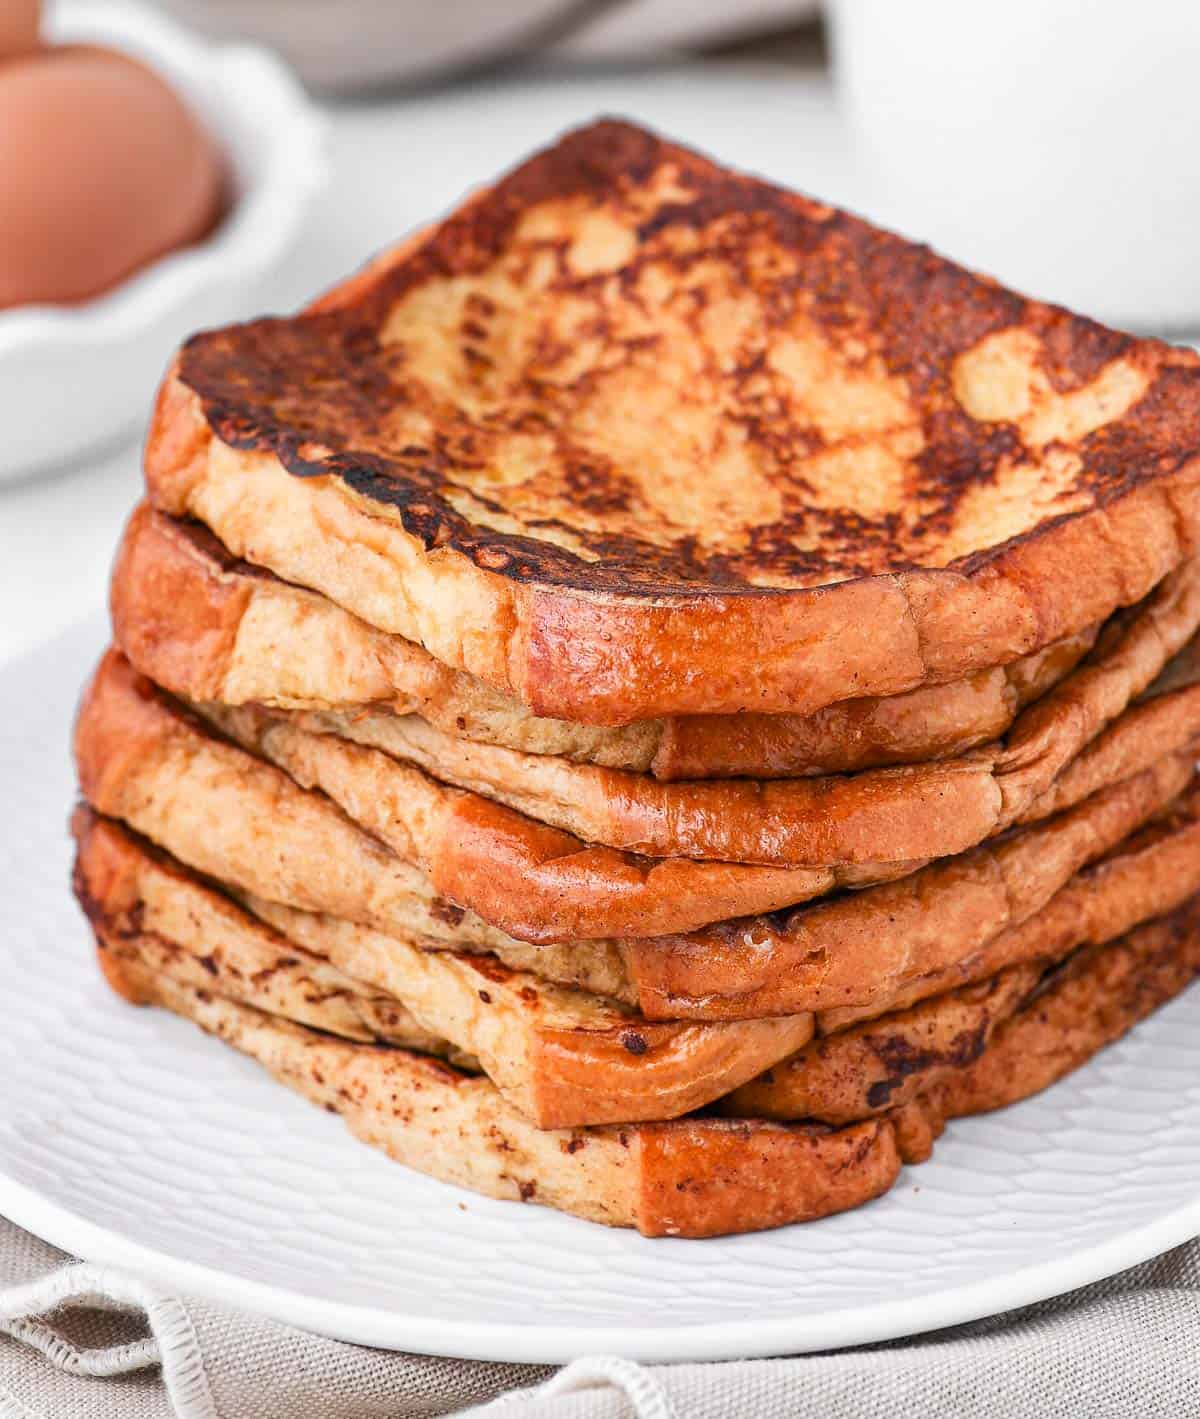 Stack of french toast on a white plate.